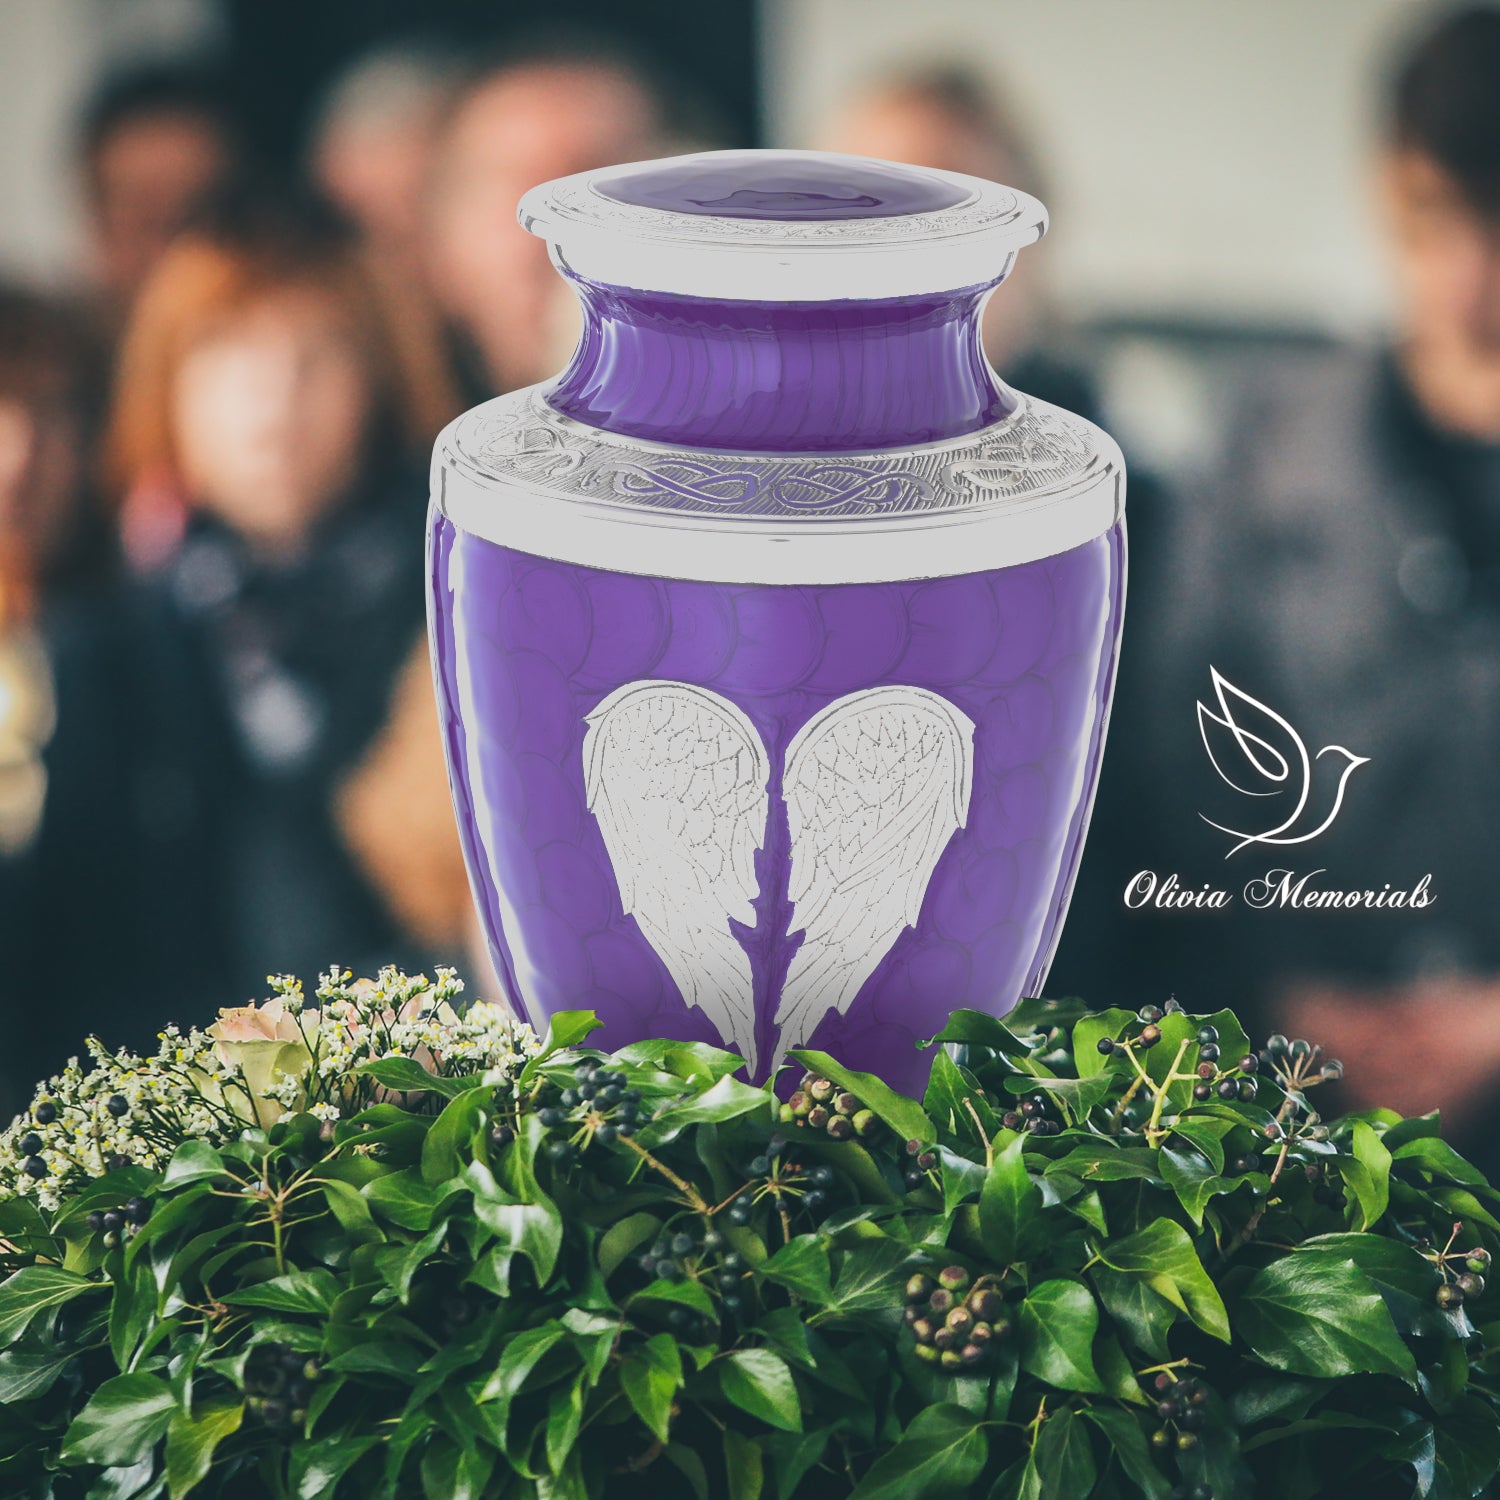 Can an urn be buried in a cemetery or is it only for displaying at home? - olivia-memorials